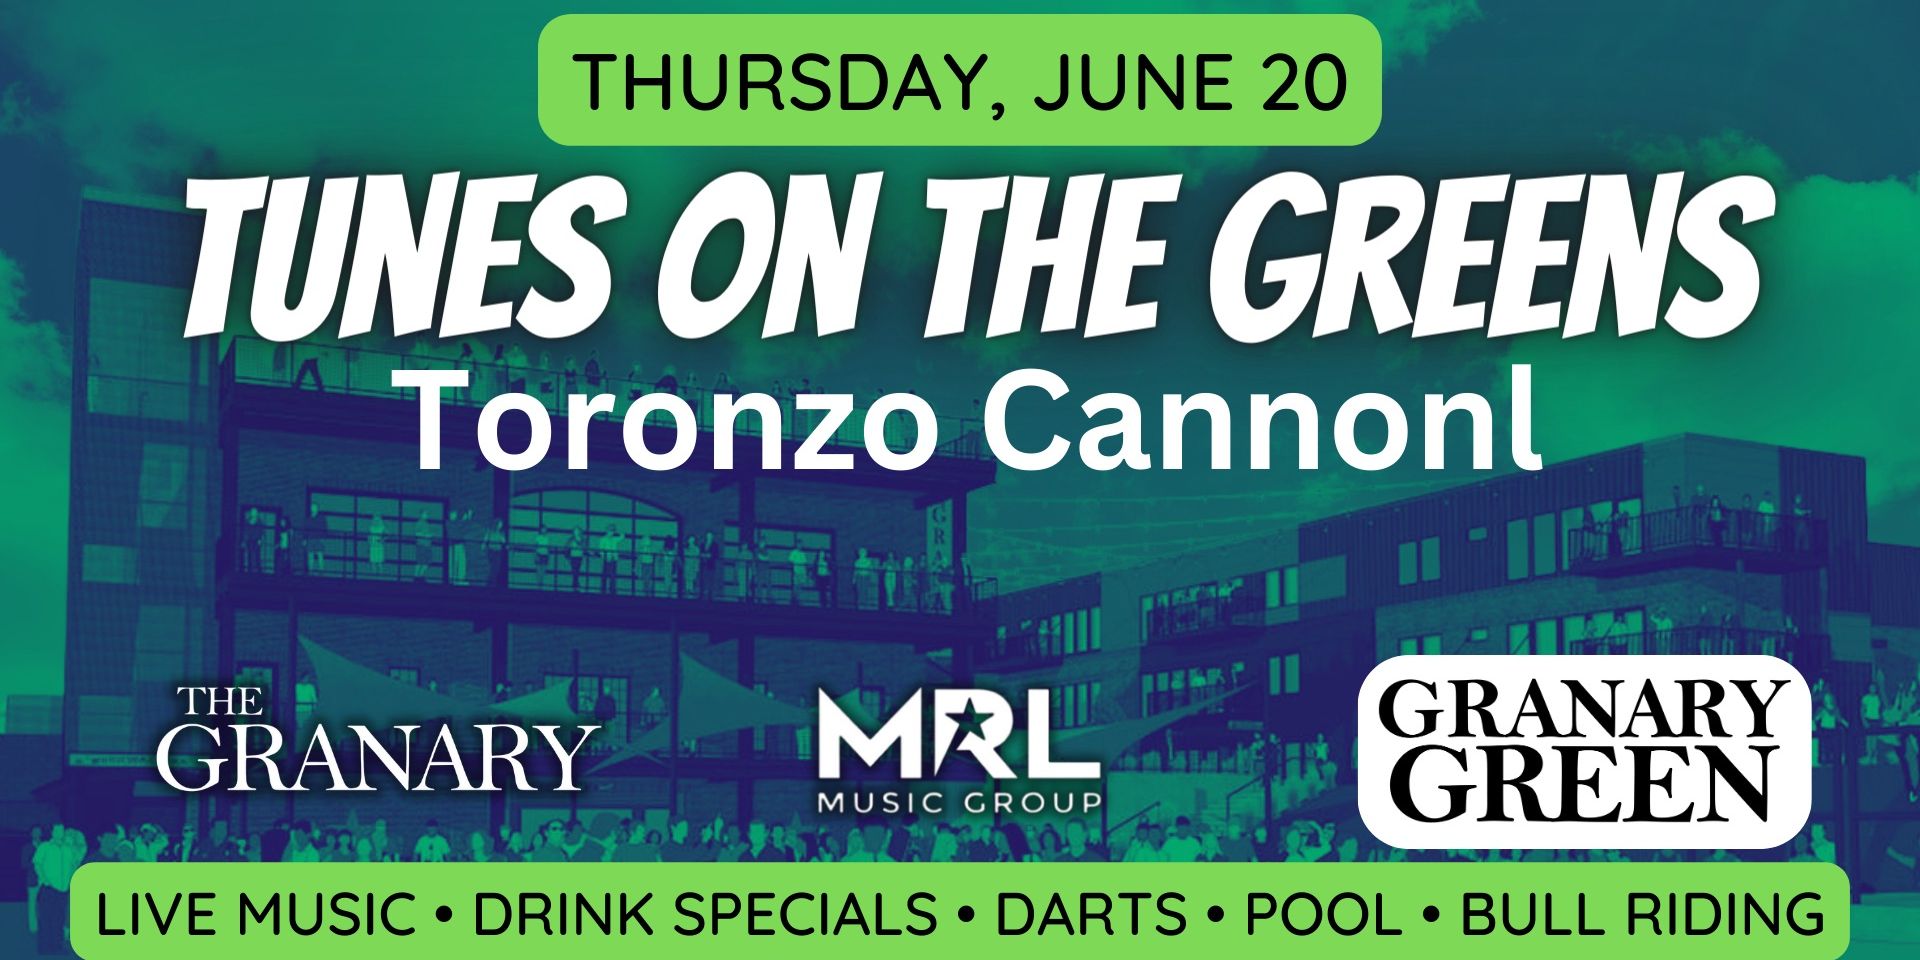 Tunes on the Green with Toronzo Cannon promotional image